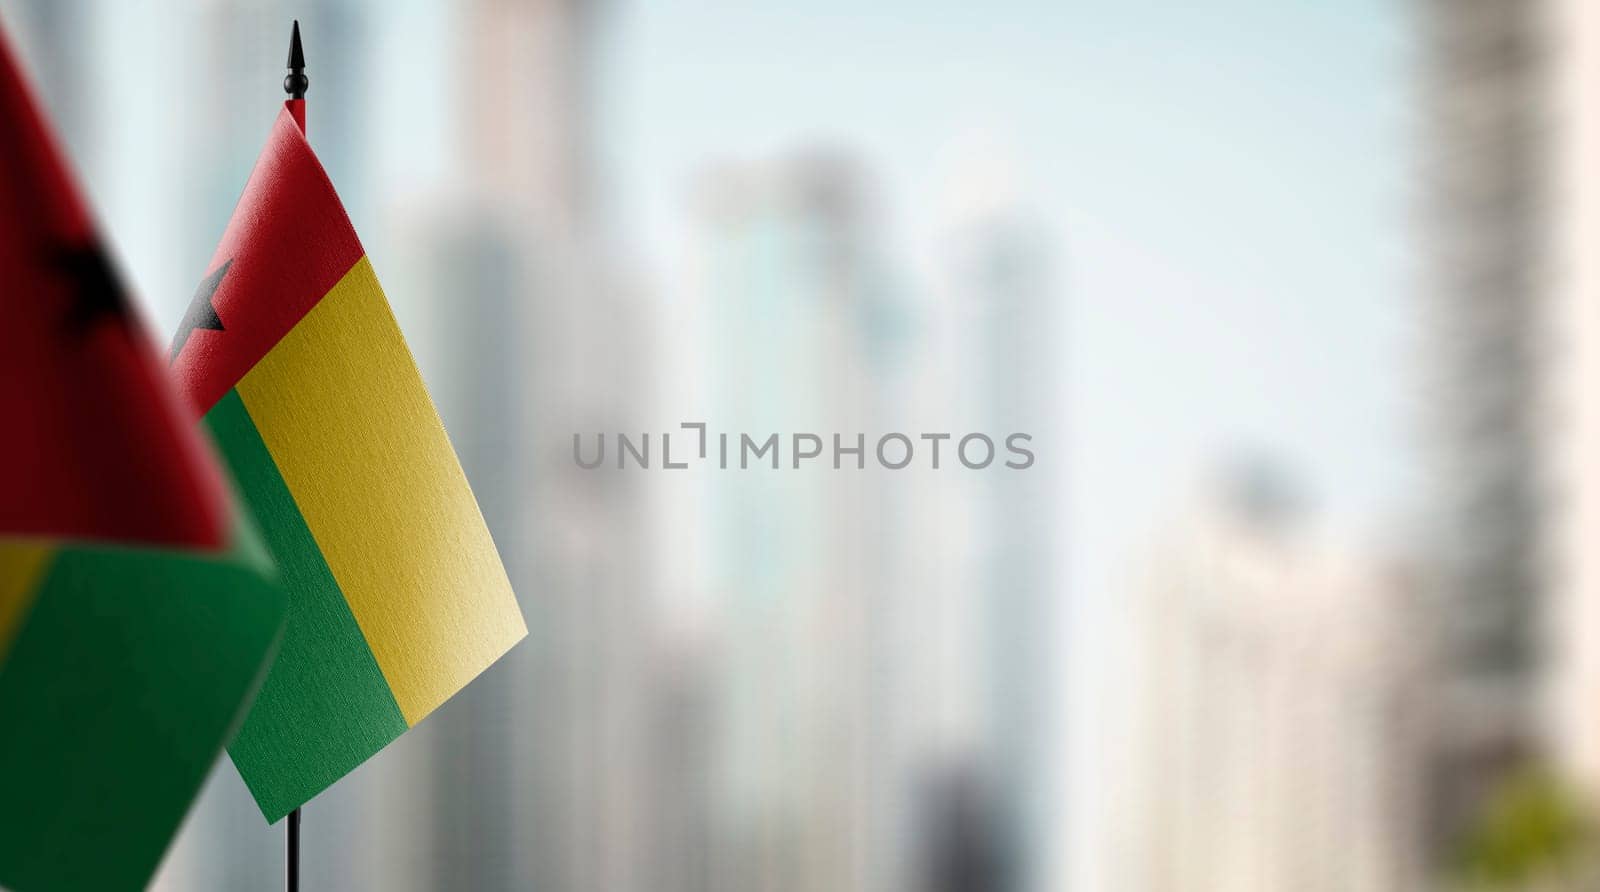 Small flags of the Guinea Bissau on an abstract blurry background.